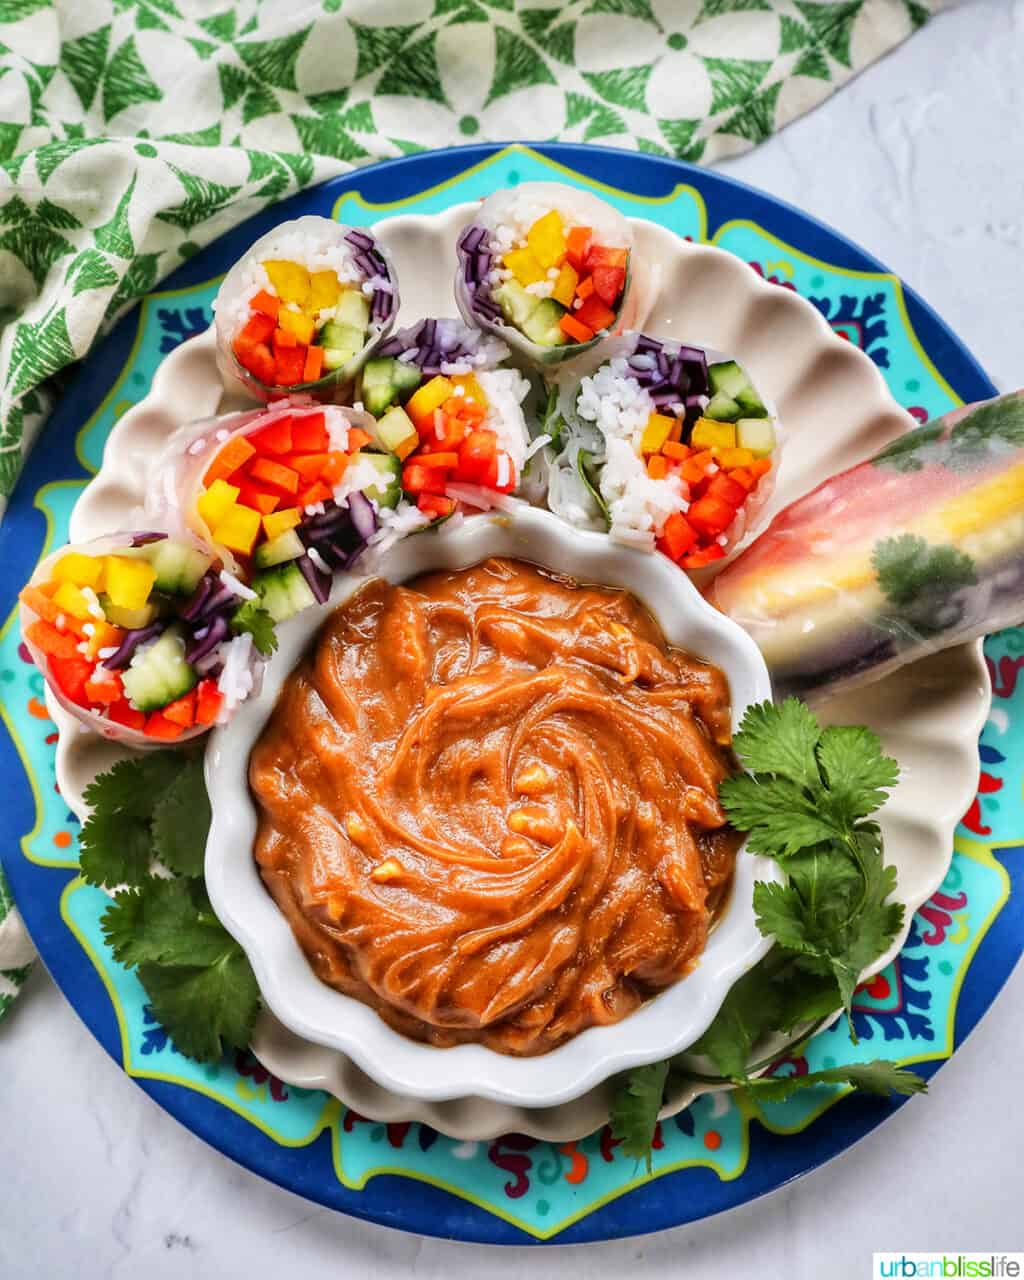 colorful plate with several vegan summer rolls cut in half showing the vegetables and vermicelli noodles with a side of thai peanut sauce in a bowl.